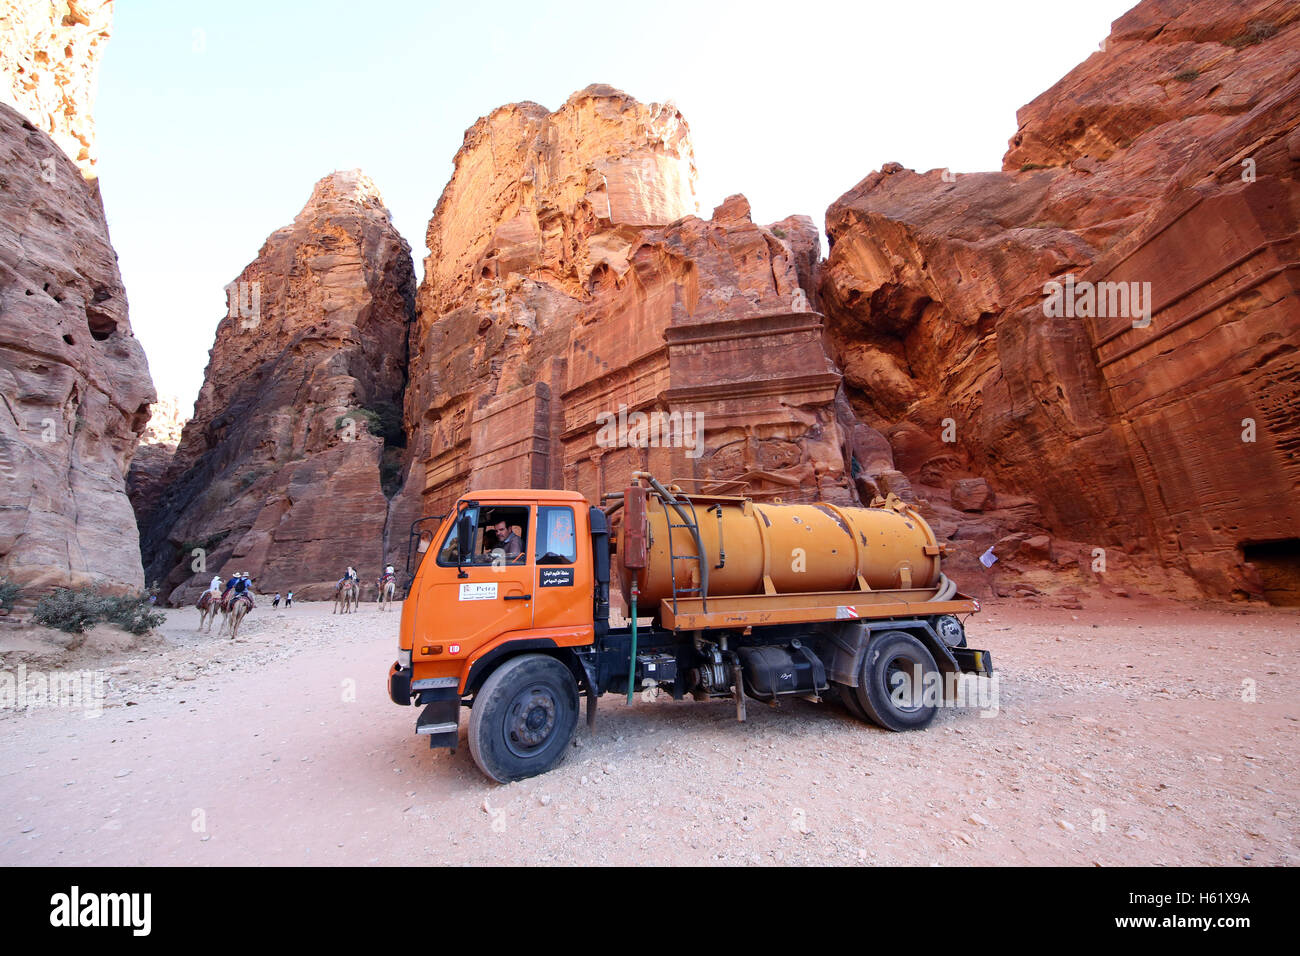 Sanitation lorry in the Street of Facades in the rock city of Petra, Jordan Stock Photo